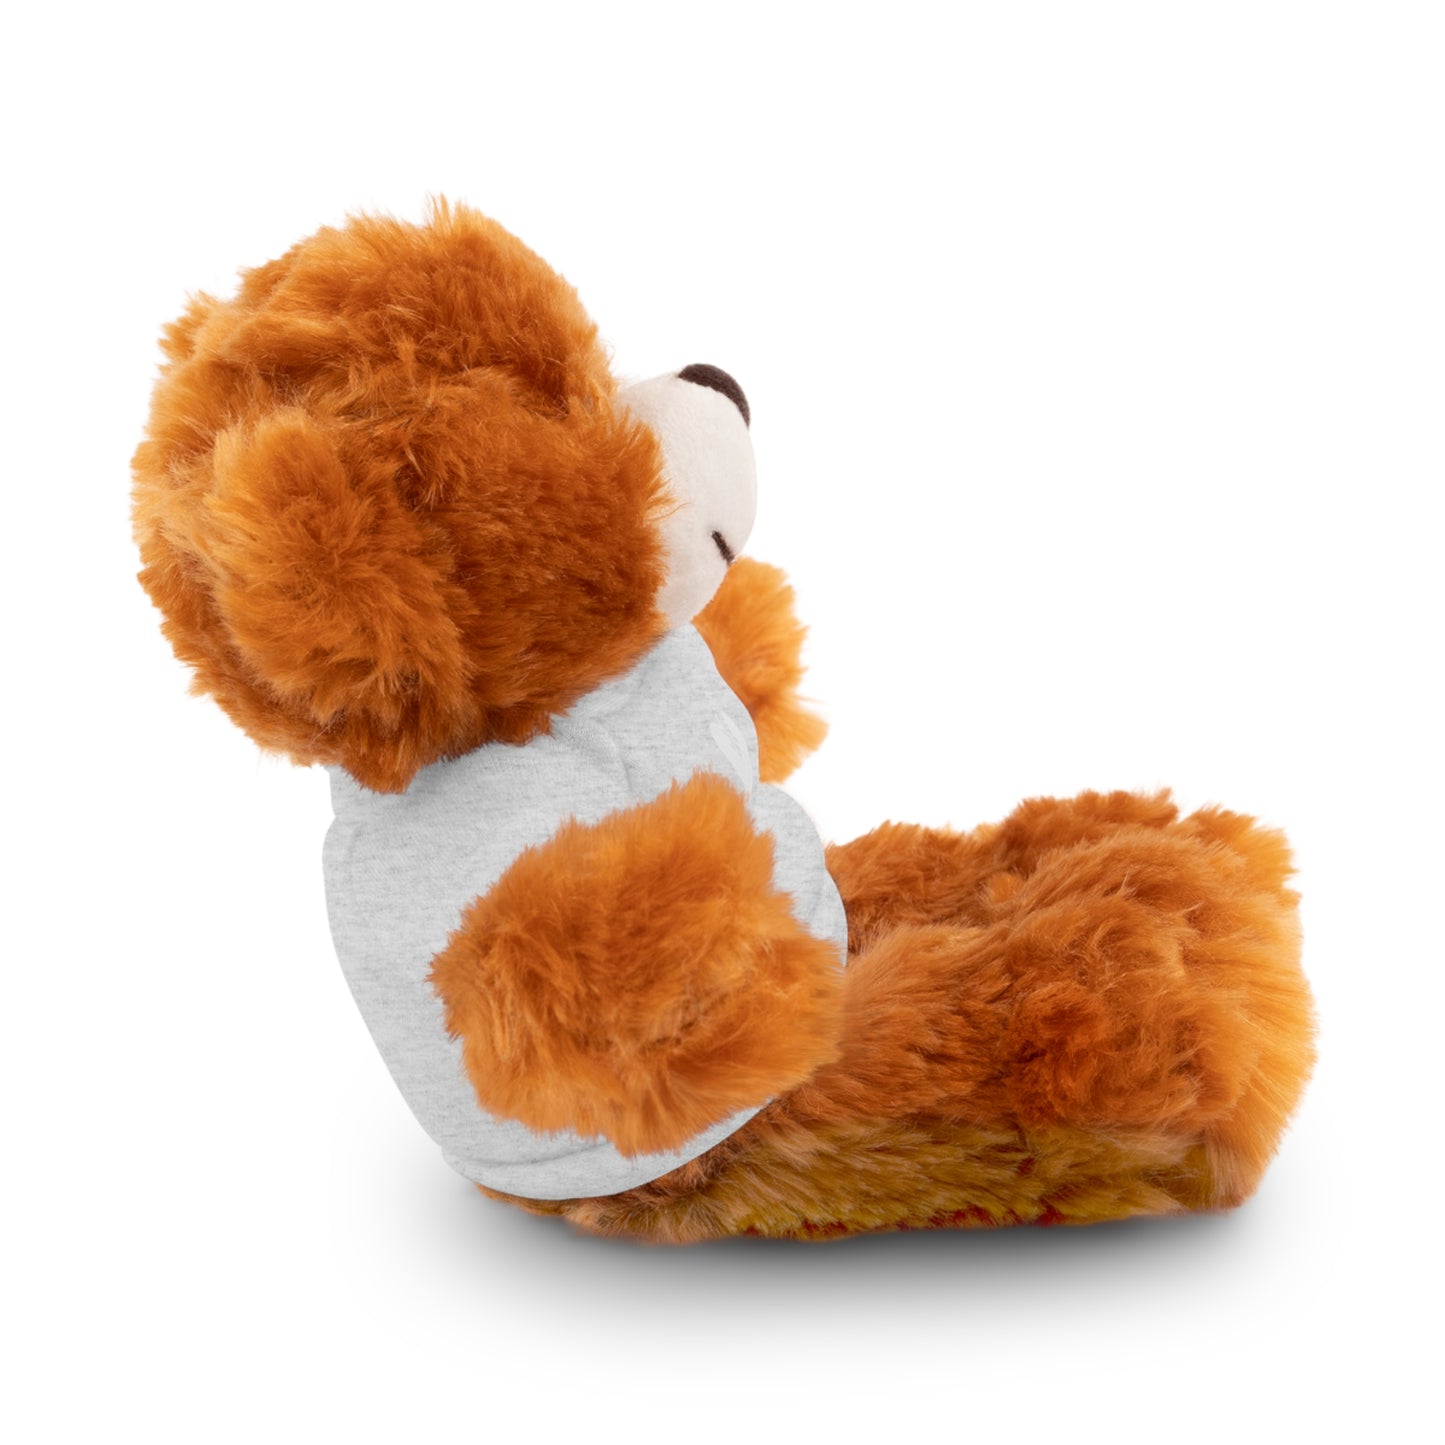 As if you love me Stuffed Animals with Tee